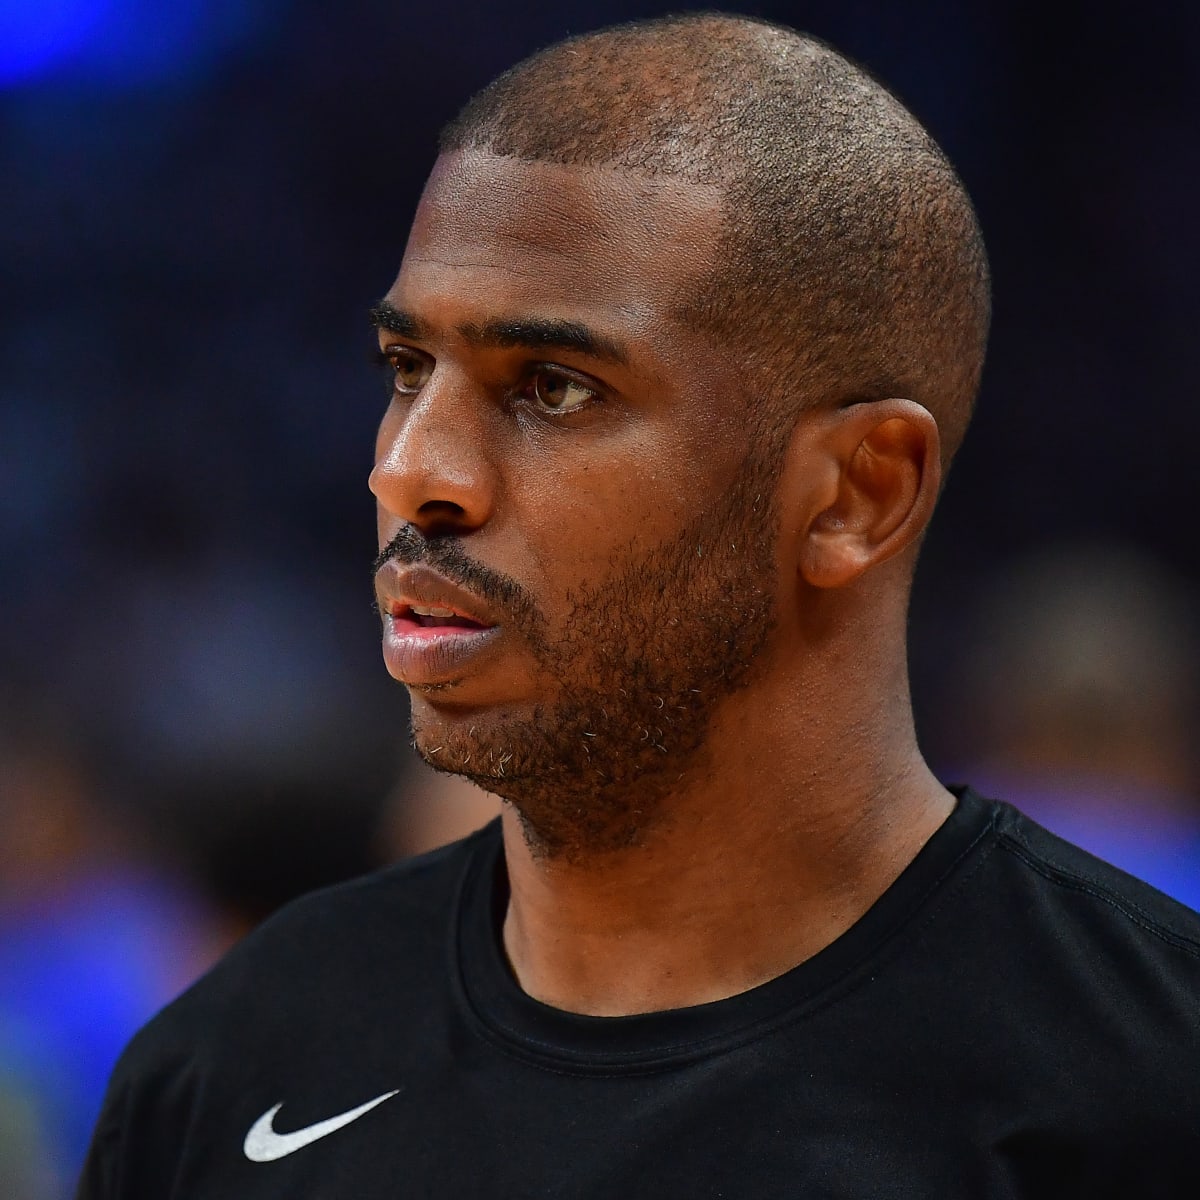 Chris Paul shares stories about his grandfather, other family